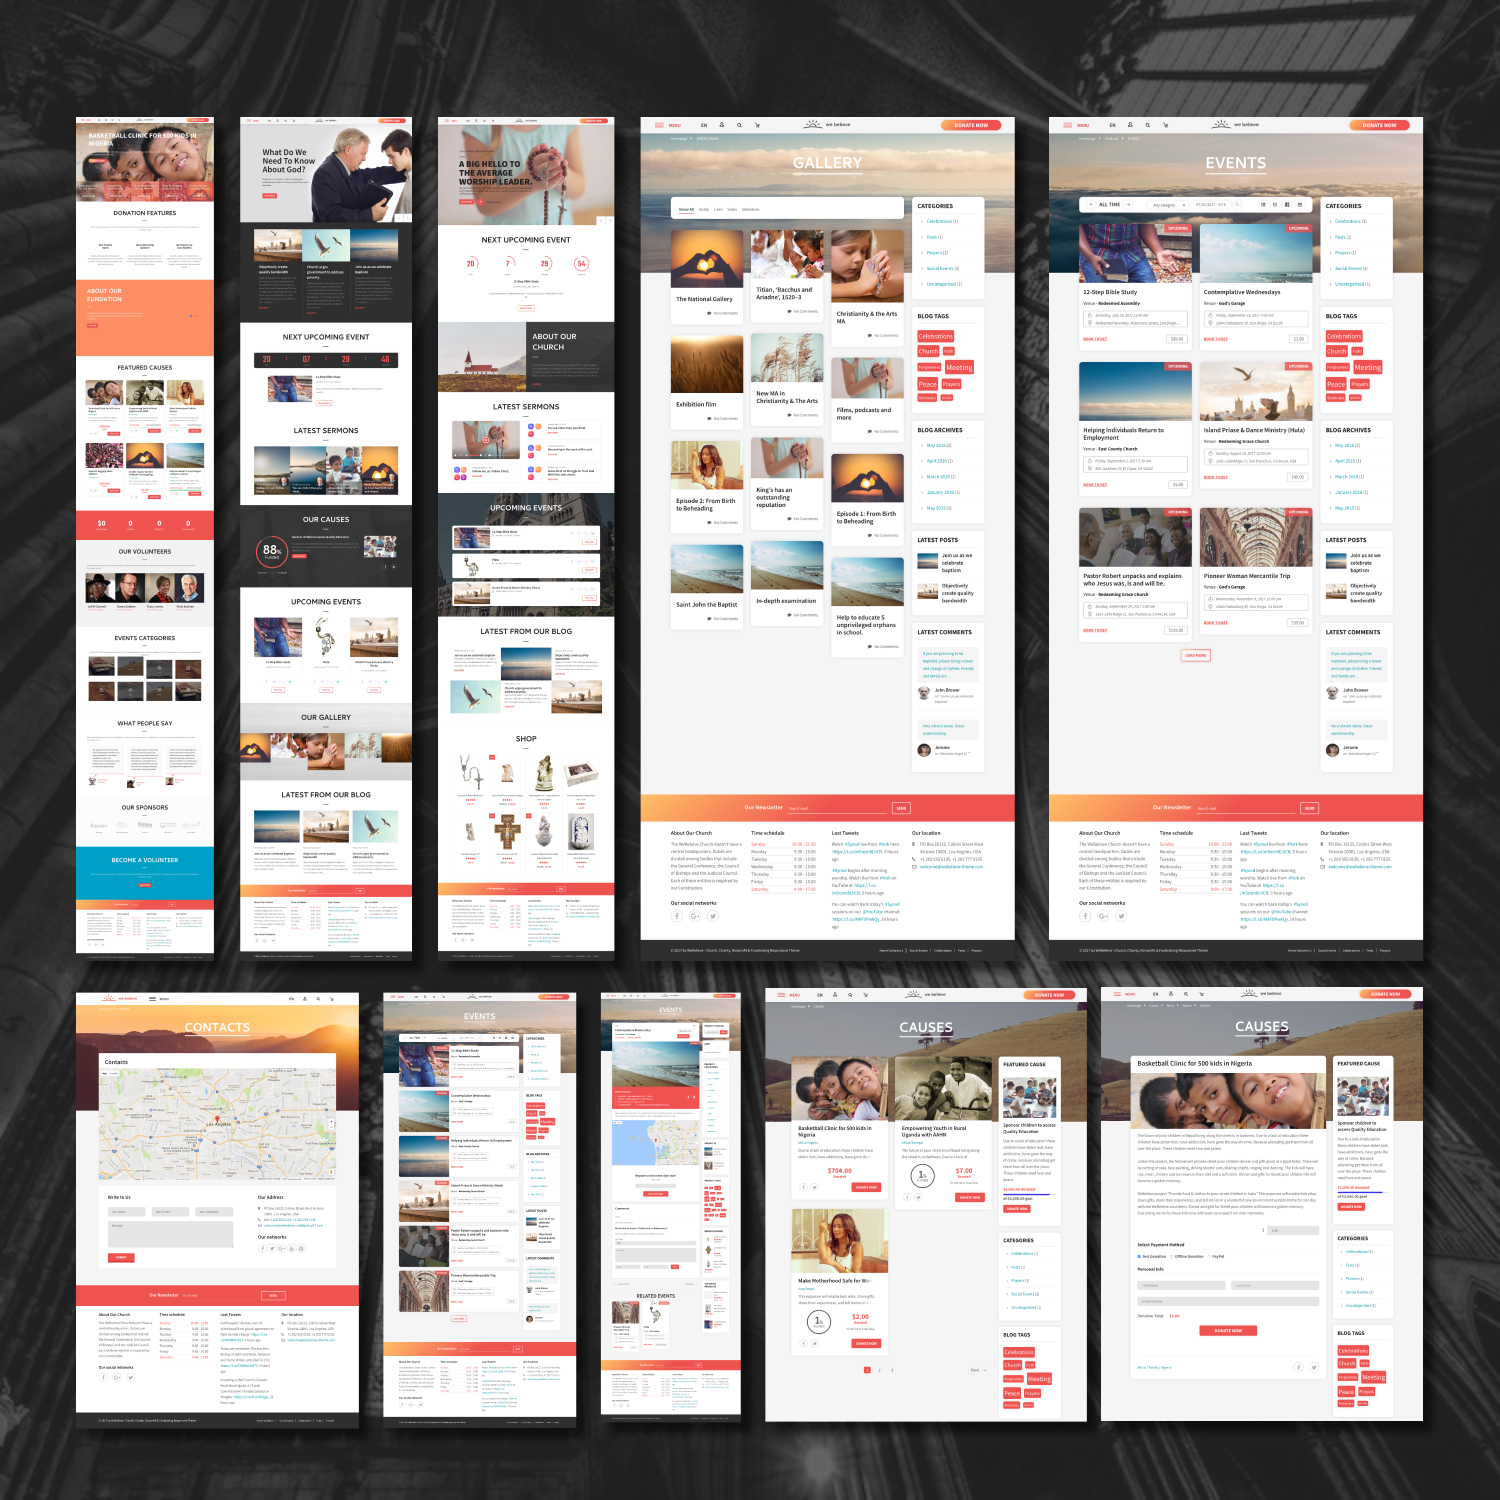 Preview webelieve church charity and fundraising responsive multi purpose wp theme.